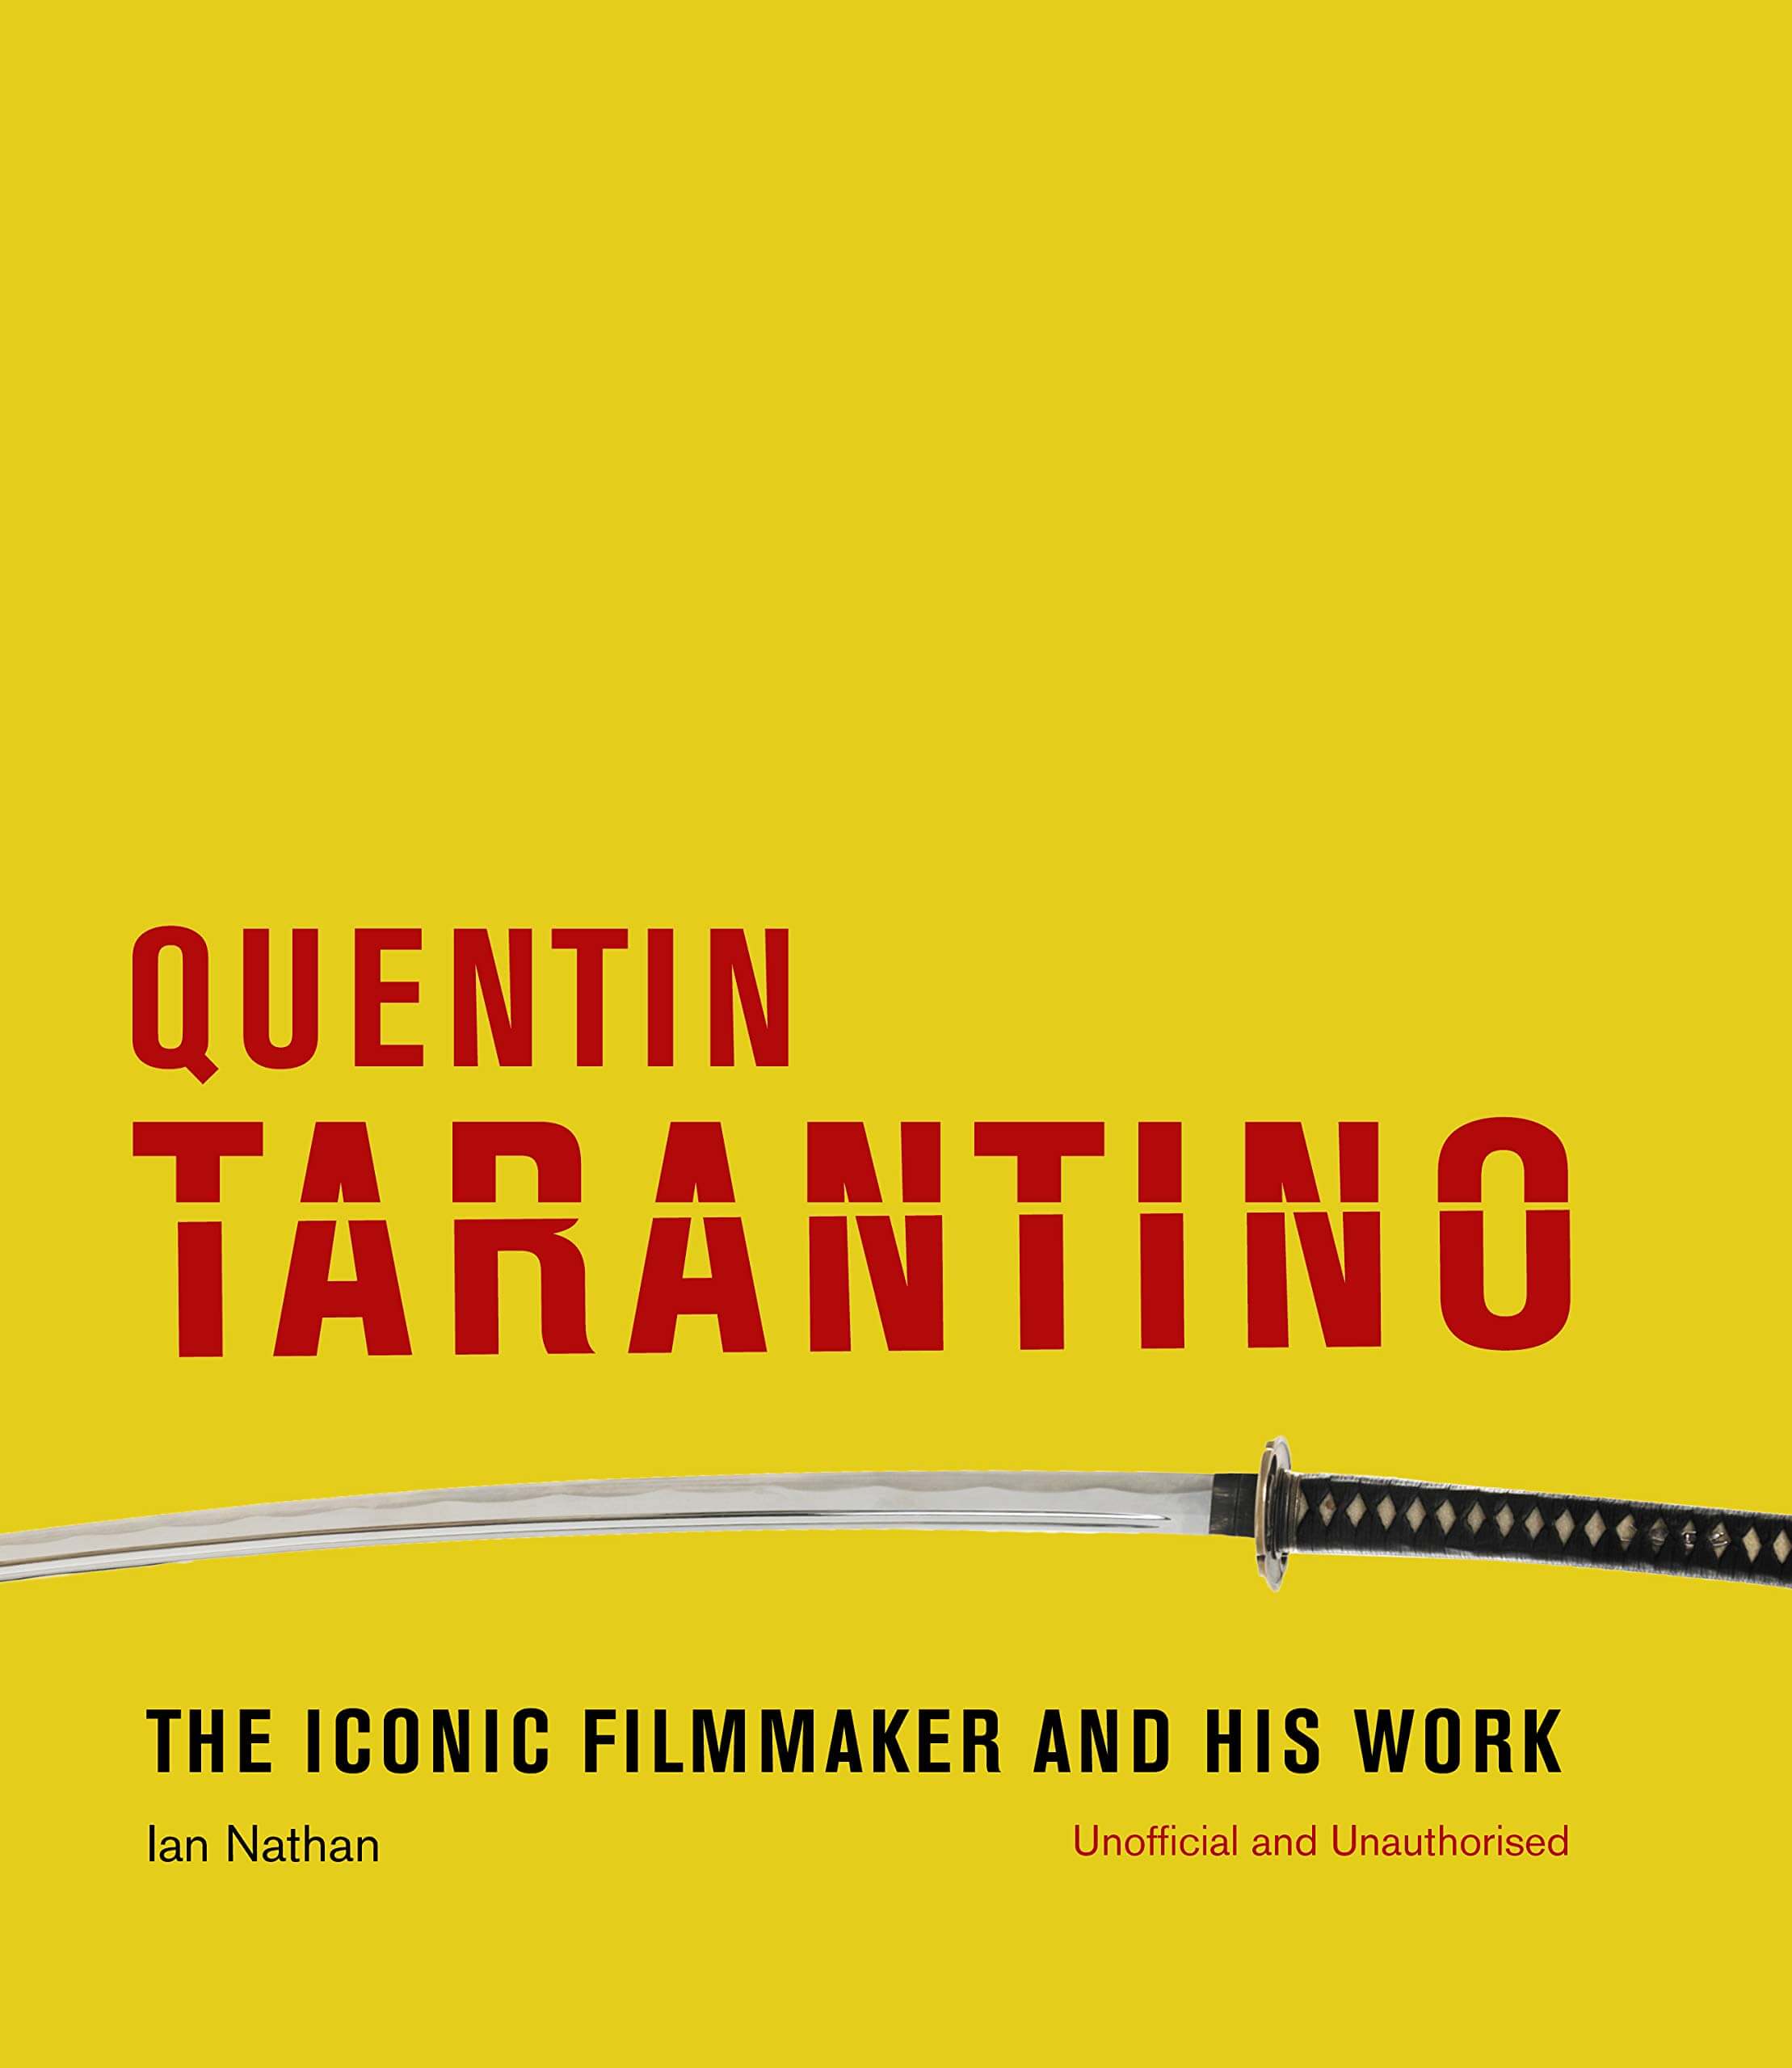 QUENTIN TARANTINO: THE ICONIC FILMMAKER AND HIS WORK